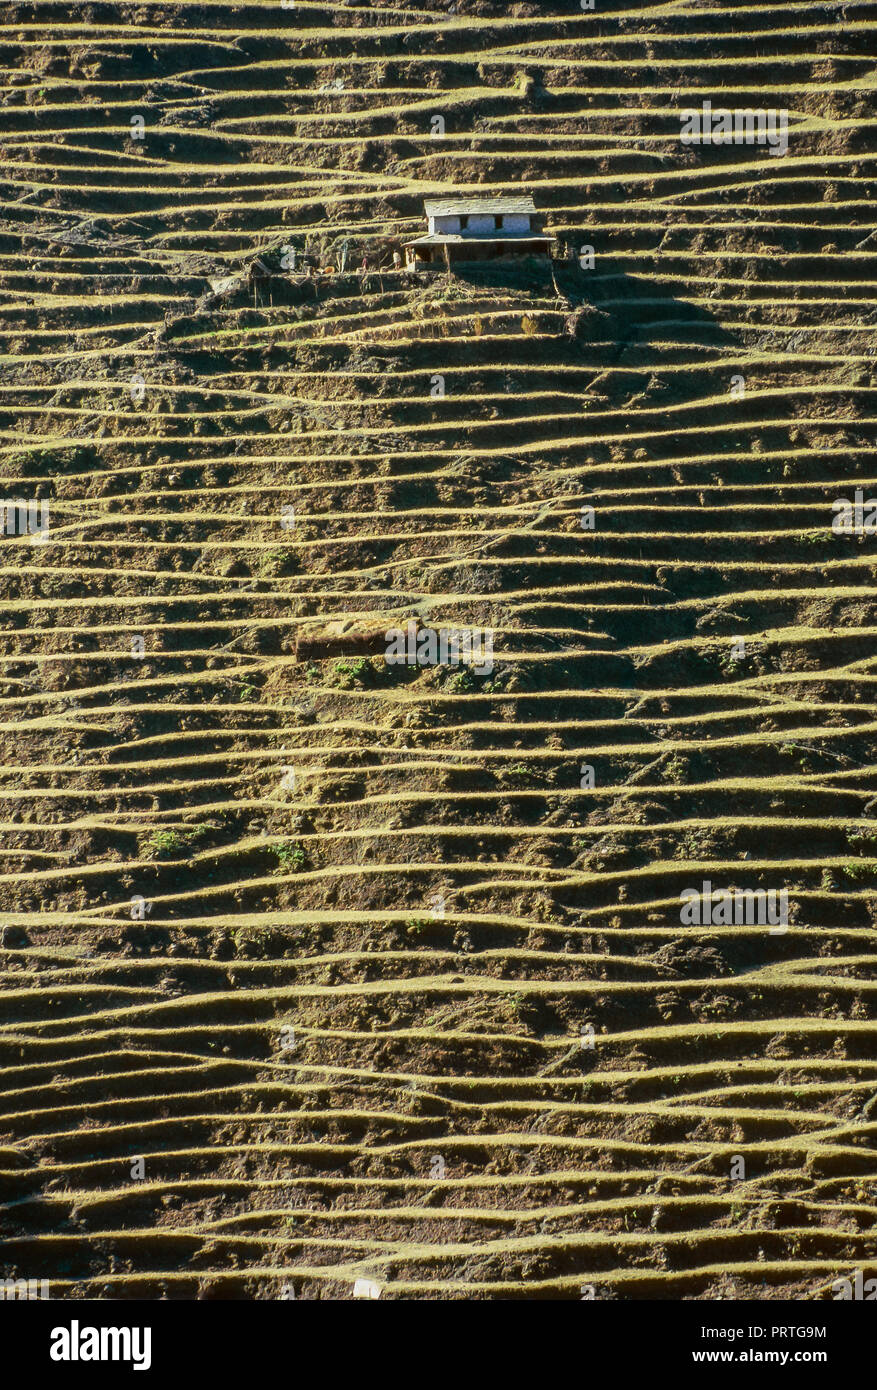 Nepal Agricultural terracing in winter on the trek to Annapurna. Analogue photography Stock Photo